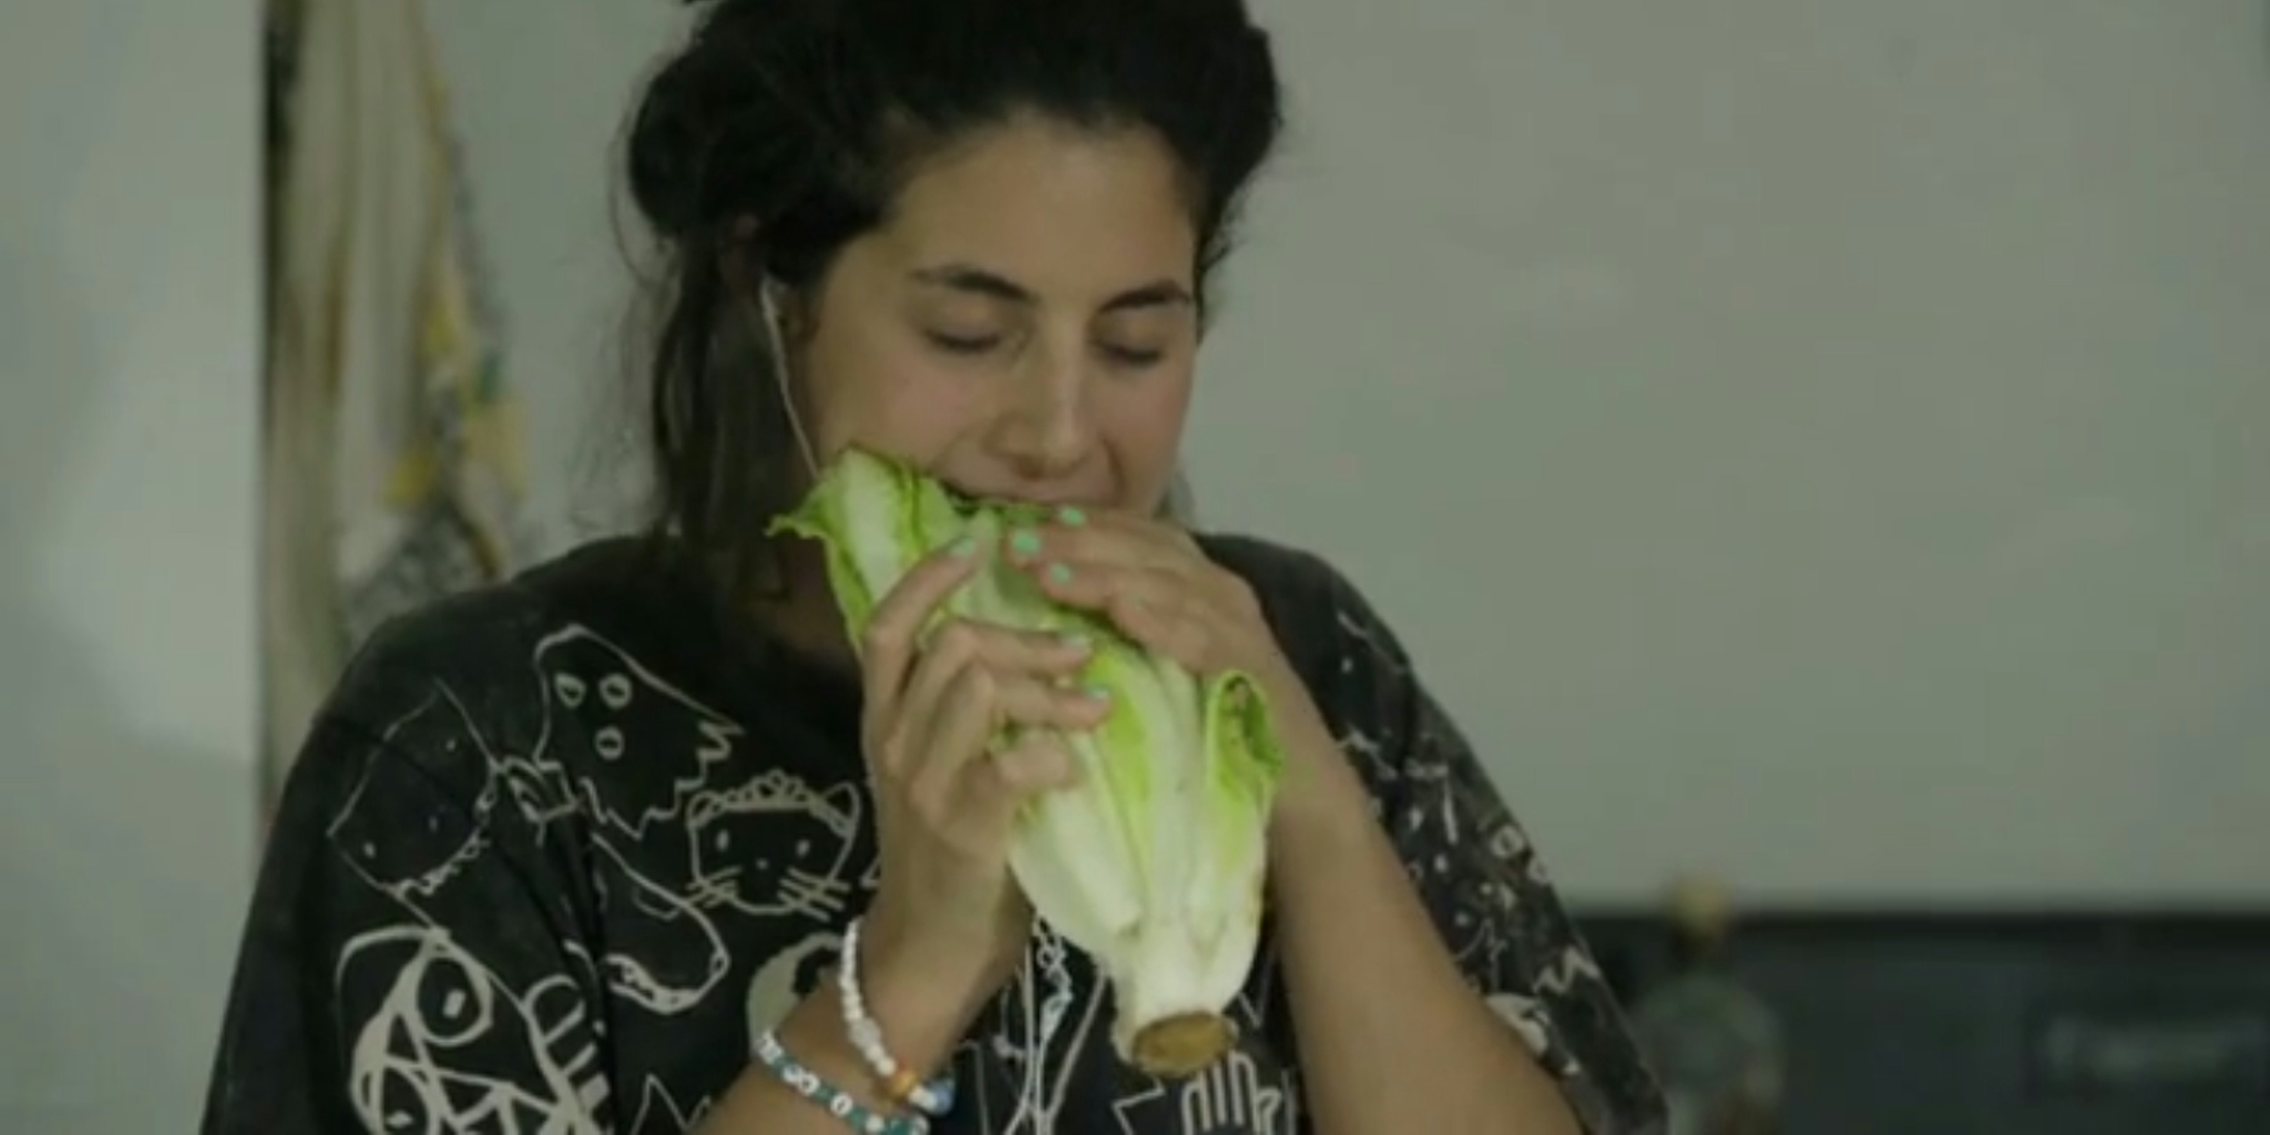 This webseries wants you to see the funny side of eating disorders ...